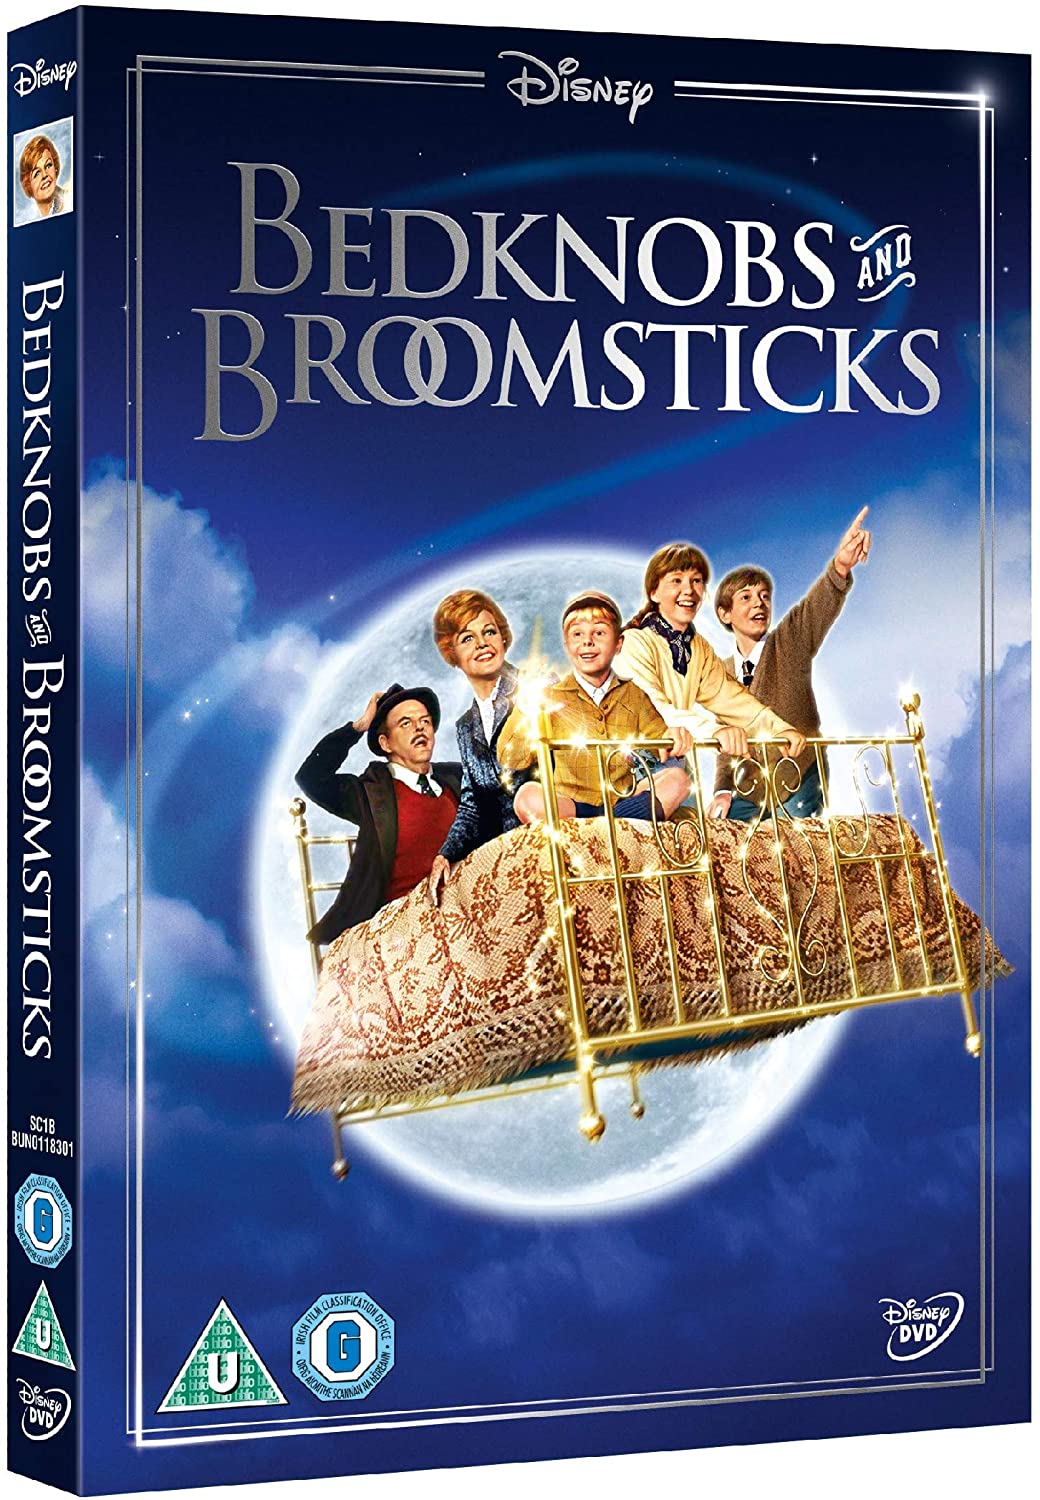 Bedknobs and Broomsticks - Family/Fantasy [DVD]